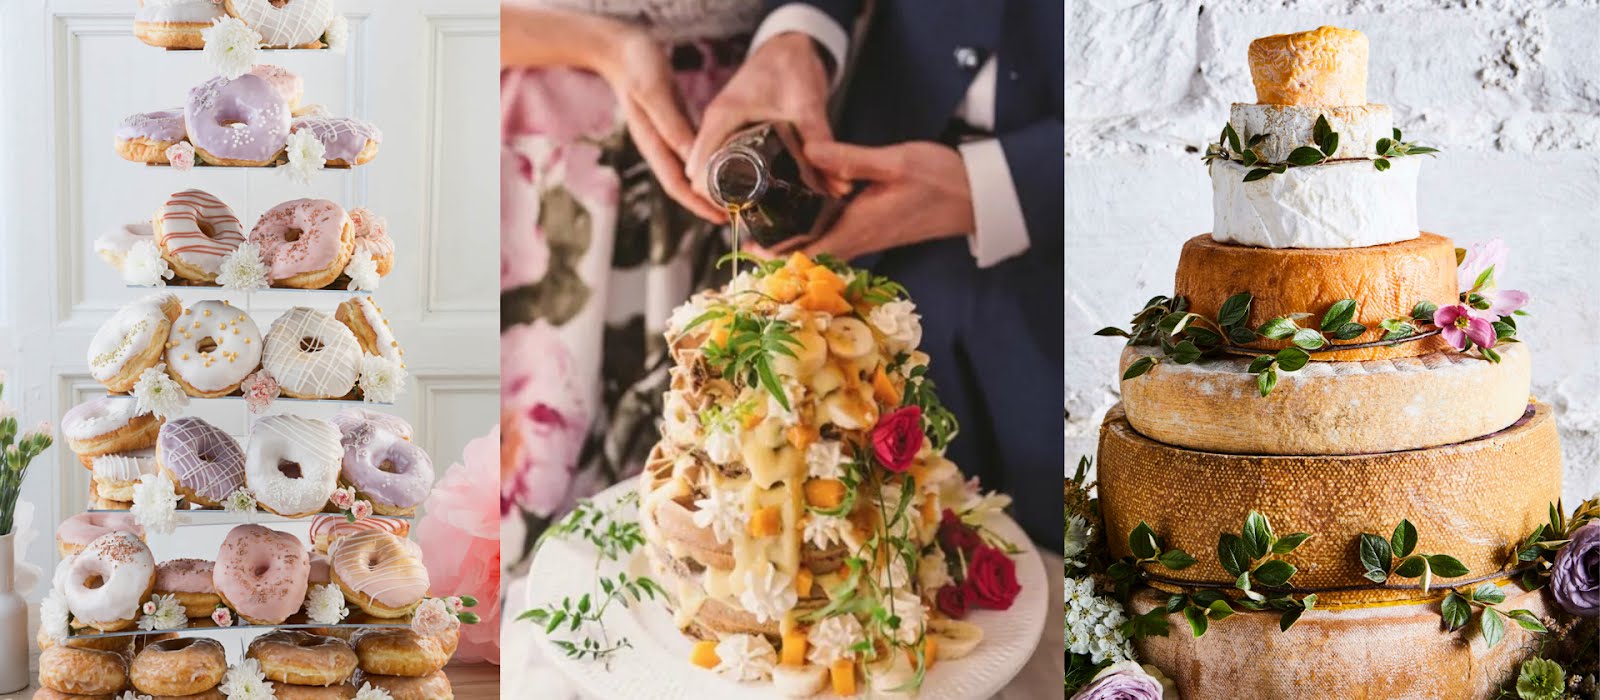 Ditch the wedding cake – these 6 alternatives are just as delicious